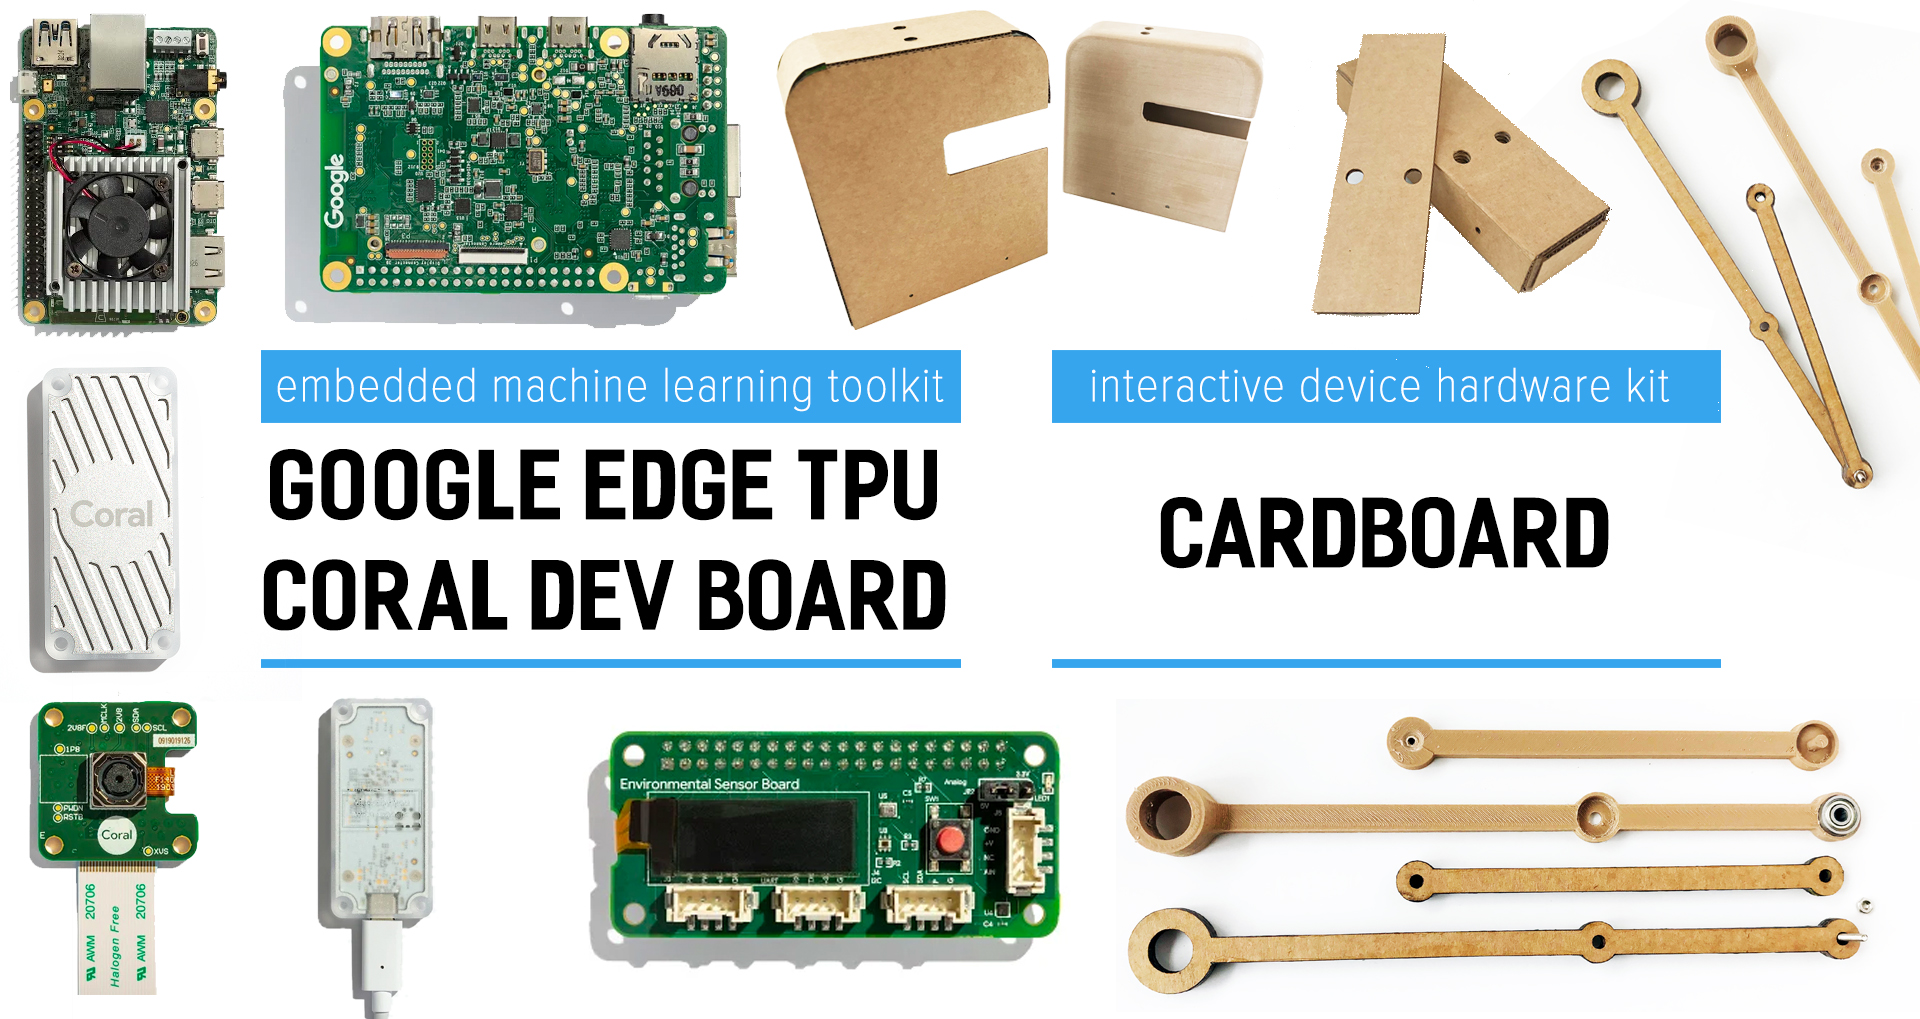 Images of embedded edge TPU coral dev board and cardboard covers